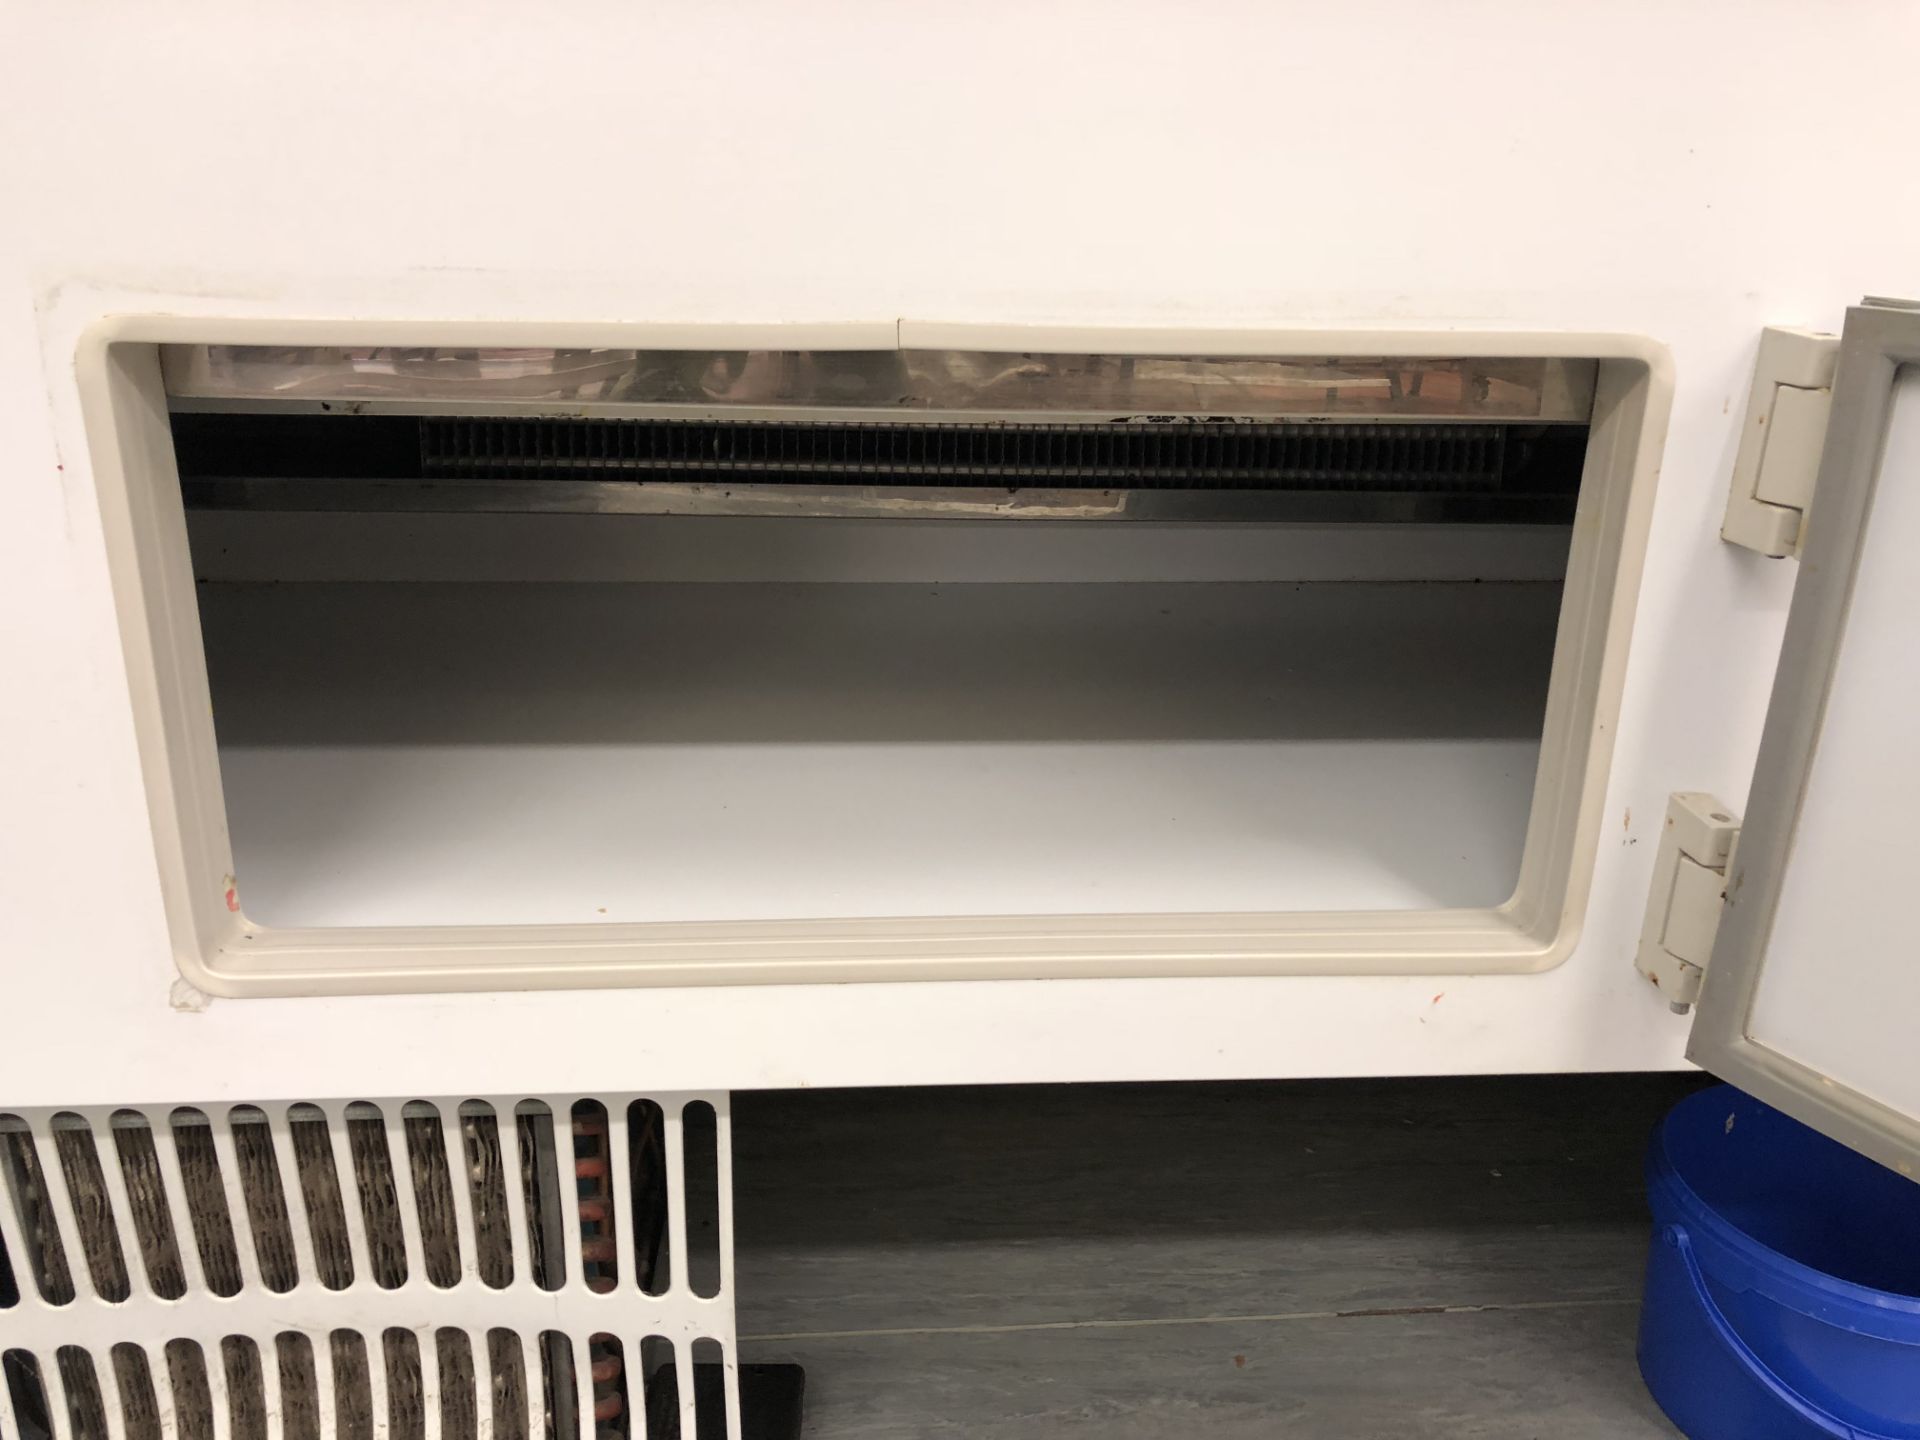 Zoin HL-15 B-VA Serve over Counter Chiller, 1500mm x 790mm, 240volts (located in Kitchen) - Image 3 of 4